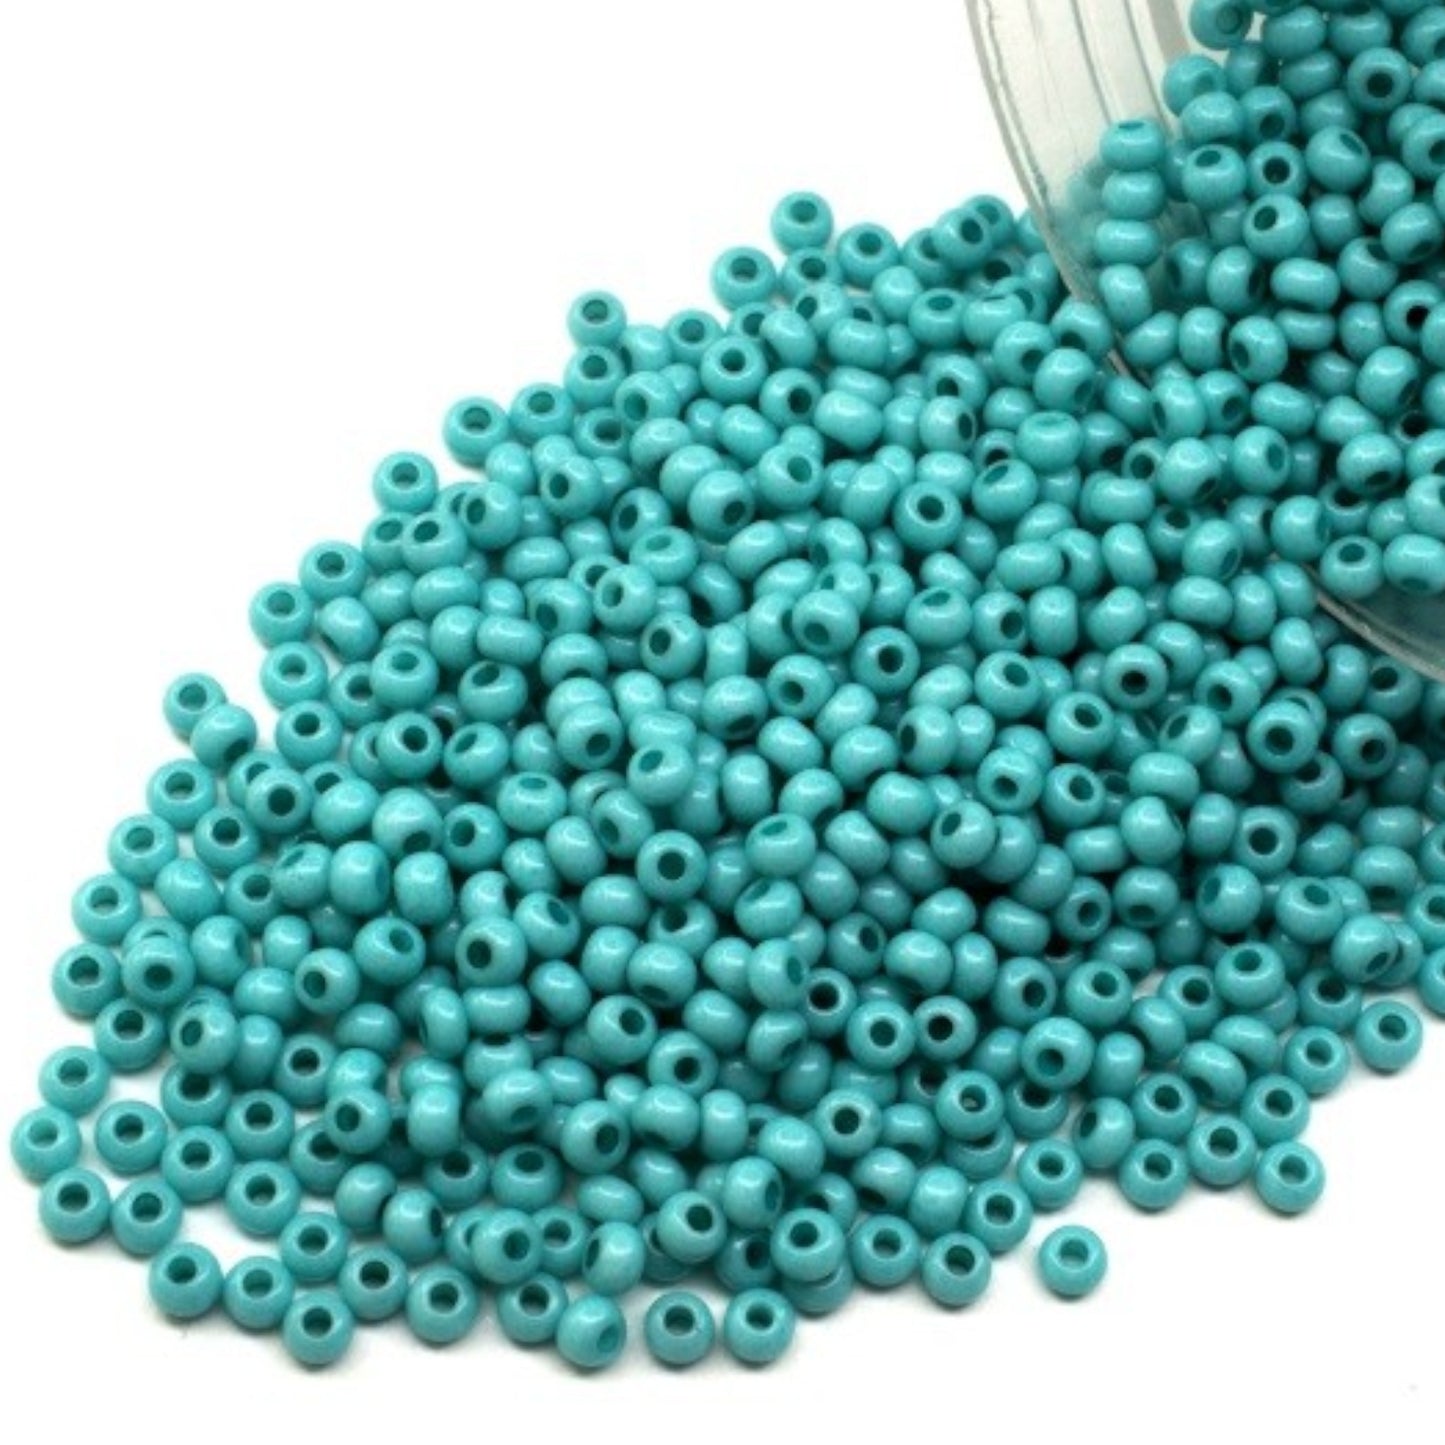 03665 Czech seed beads PRECIOSA round 10/0 turquoise. Chalk - Solgel Dyed.